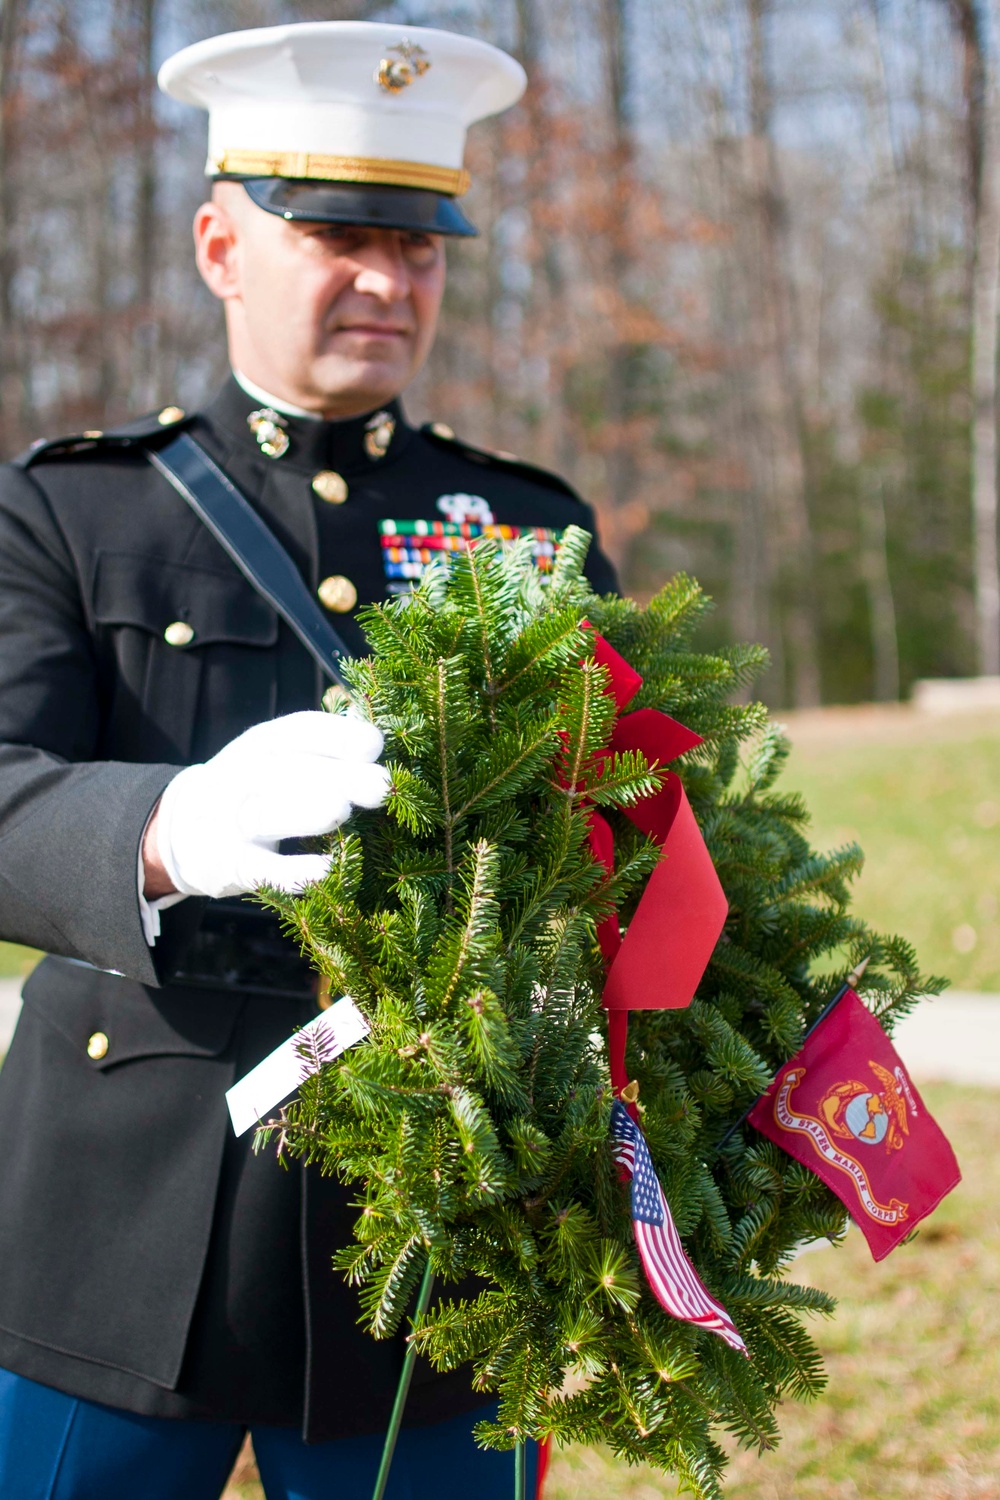 Wreaths Across America unites young and old at Quantico